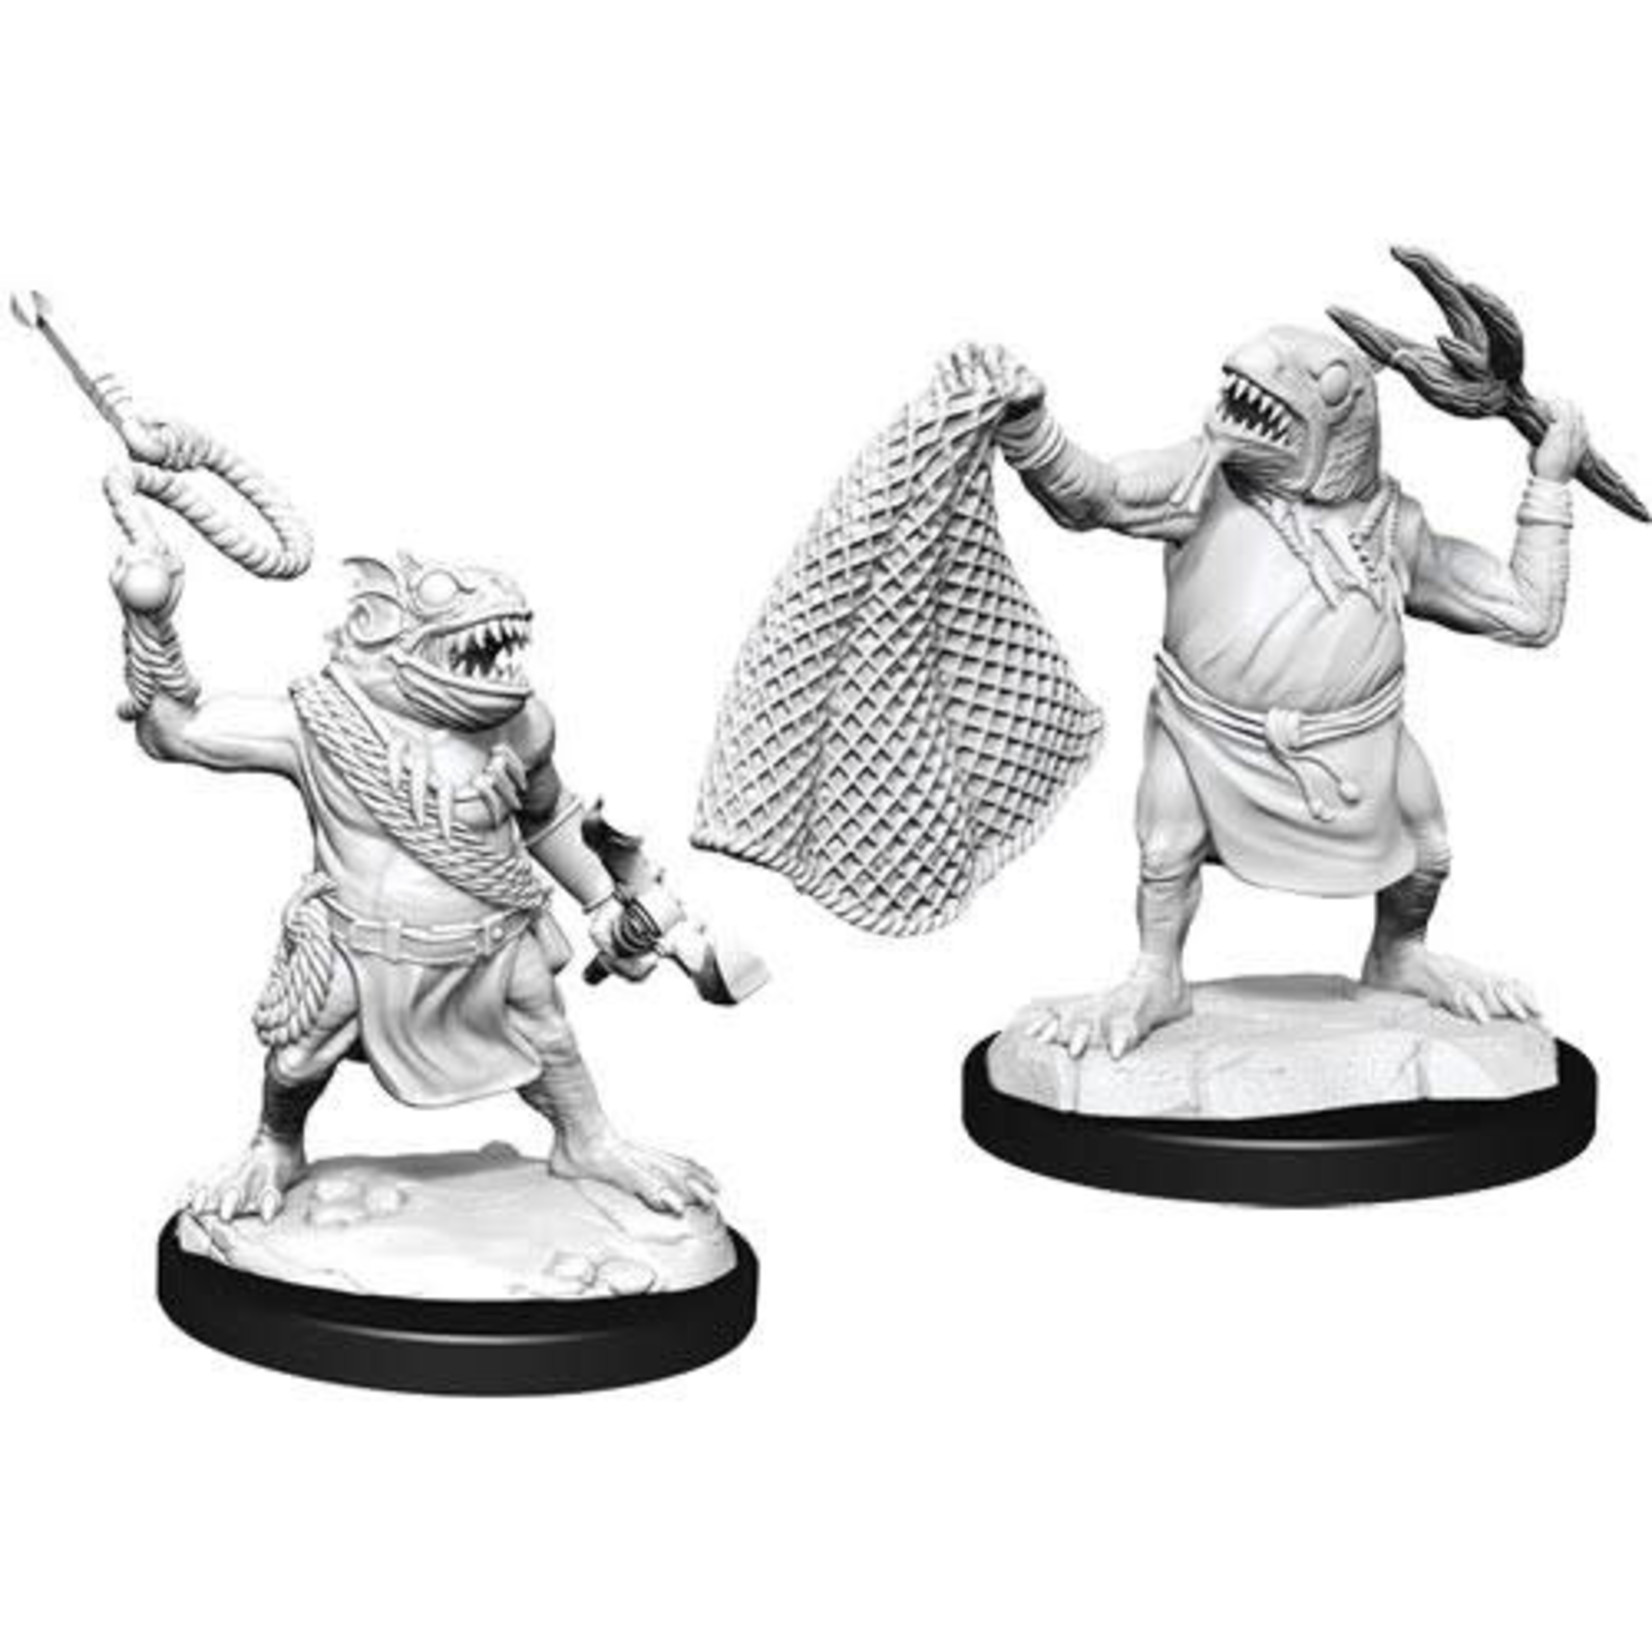 WizKids Dungeons and Dragons Nolzur's Marvelous Minis Kuo-Toa and Kuo-Toa Whip